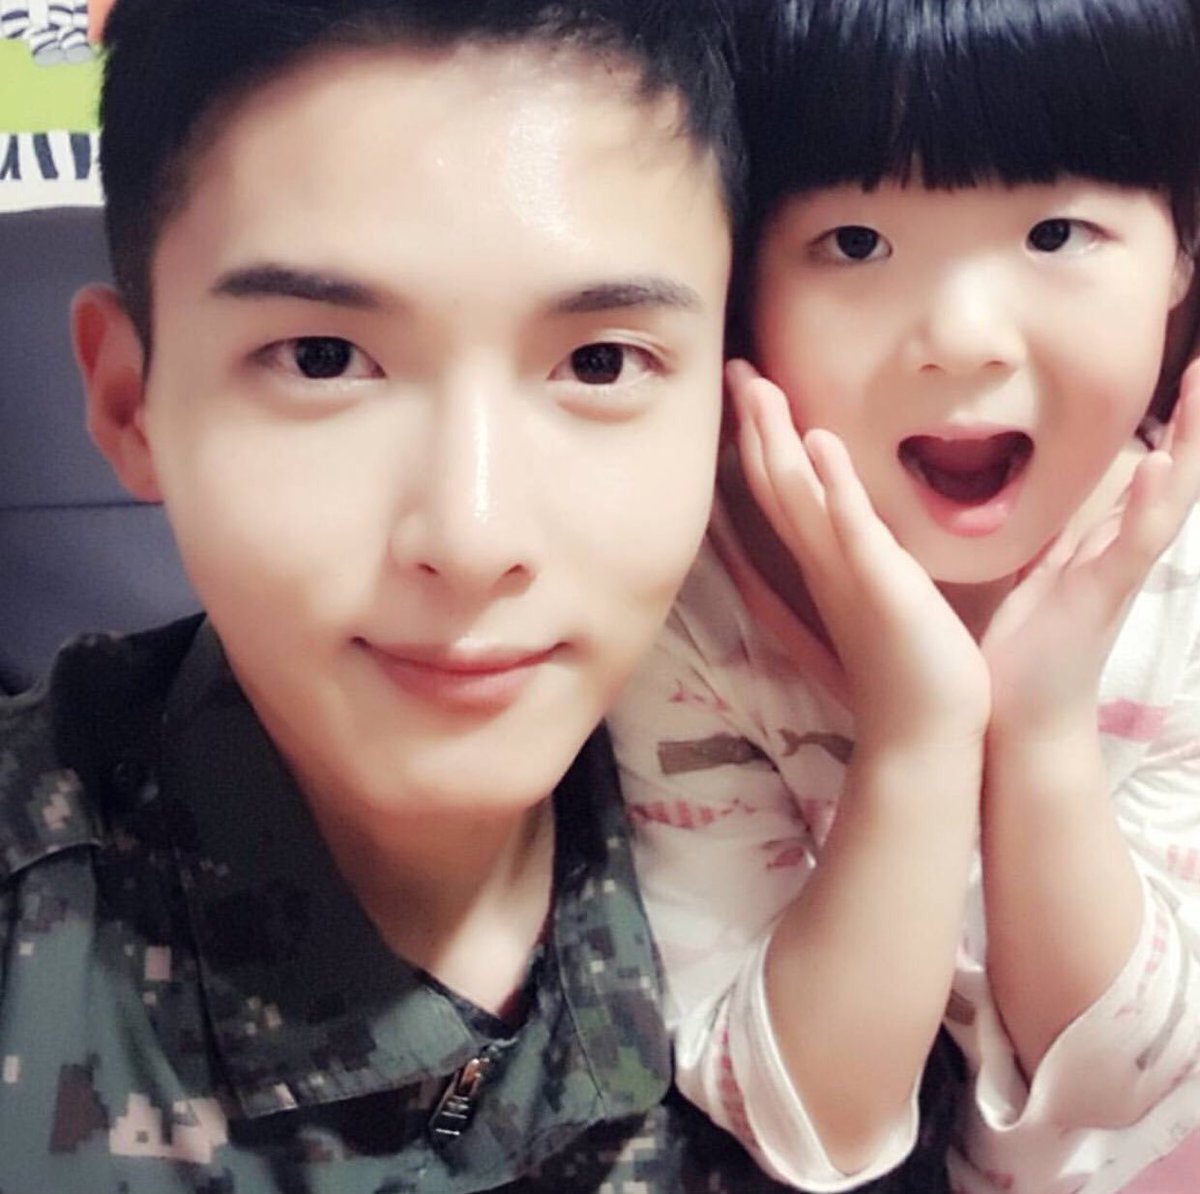 finally reached ryeowook's era with these babies during enlistment. Arent these pictures just bursting with cuteness? 